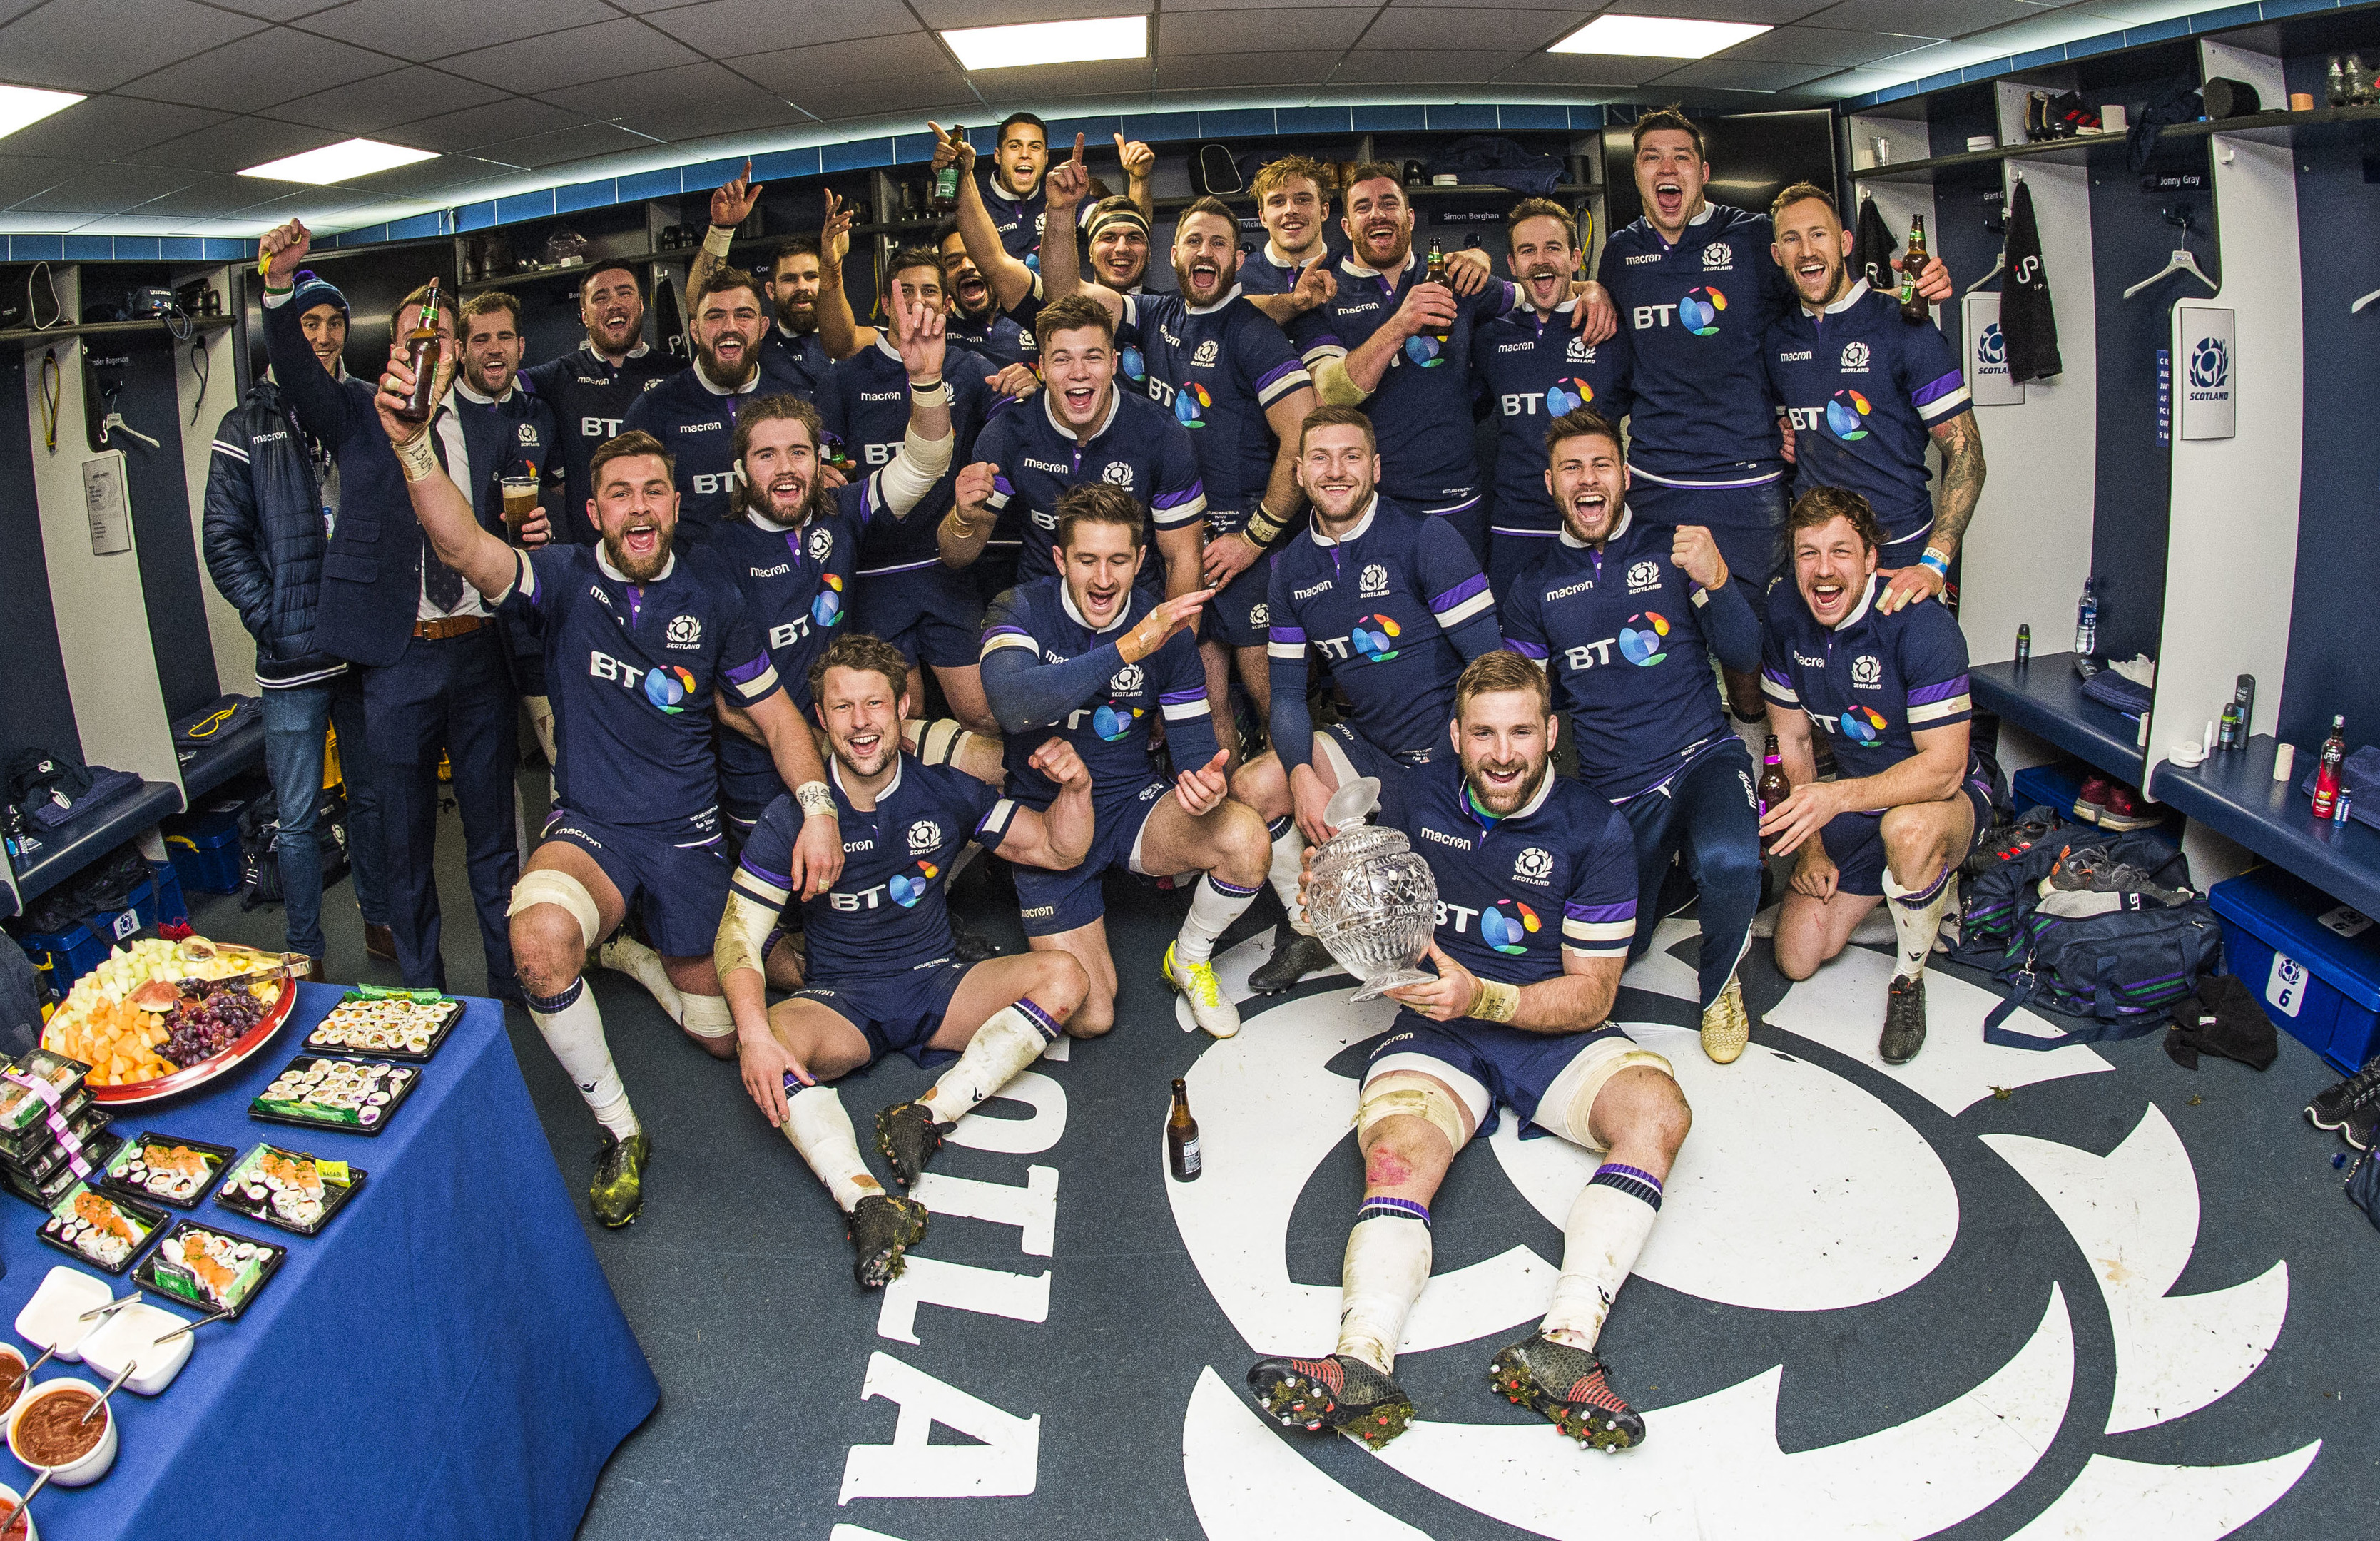 The Scotland players celebrate in the dressing room after their record win over Australia.